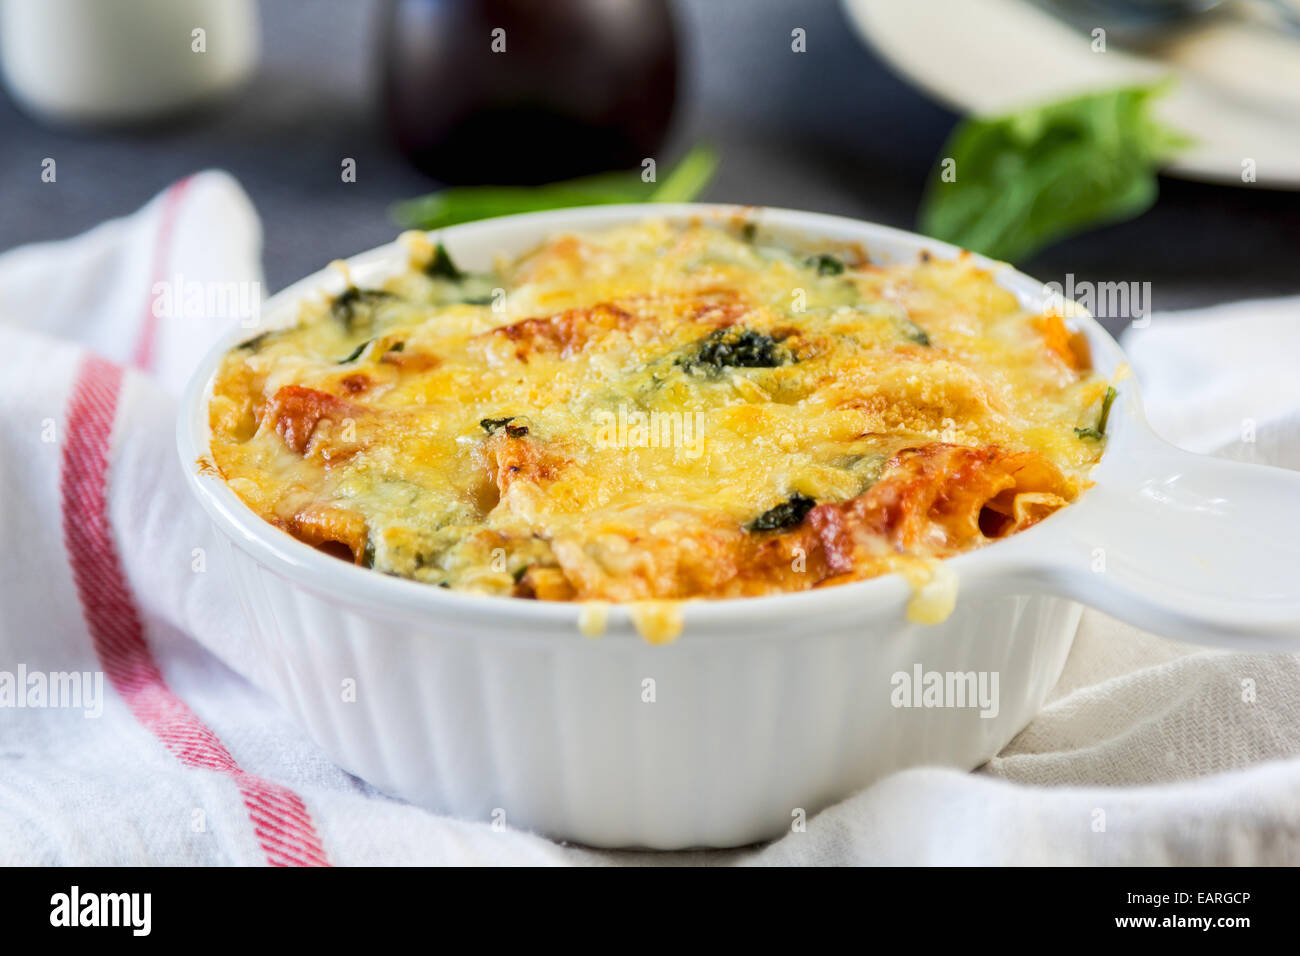 Baked Rigatoni with spinach in tomato sauce Stock Photo